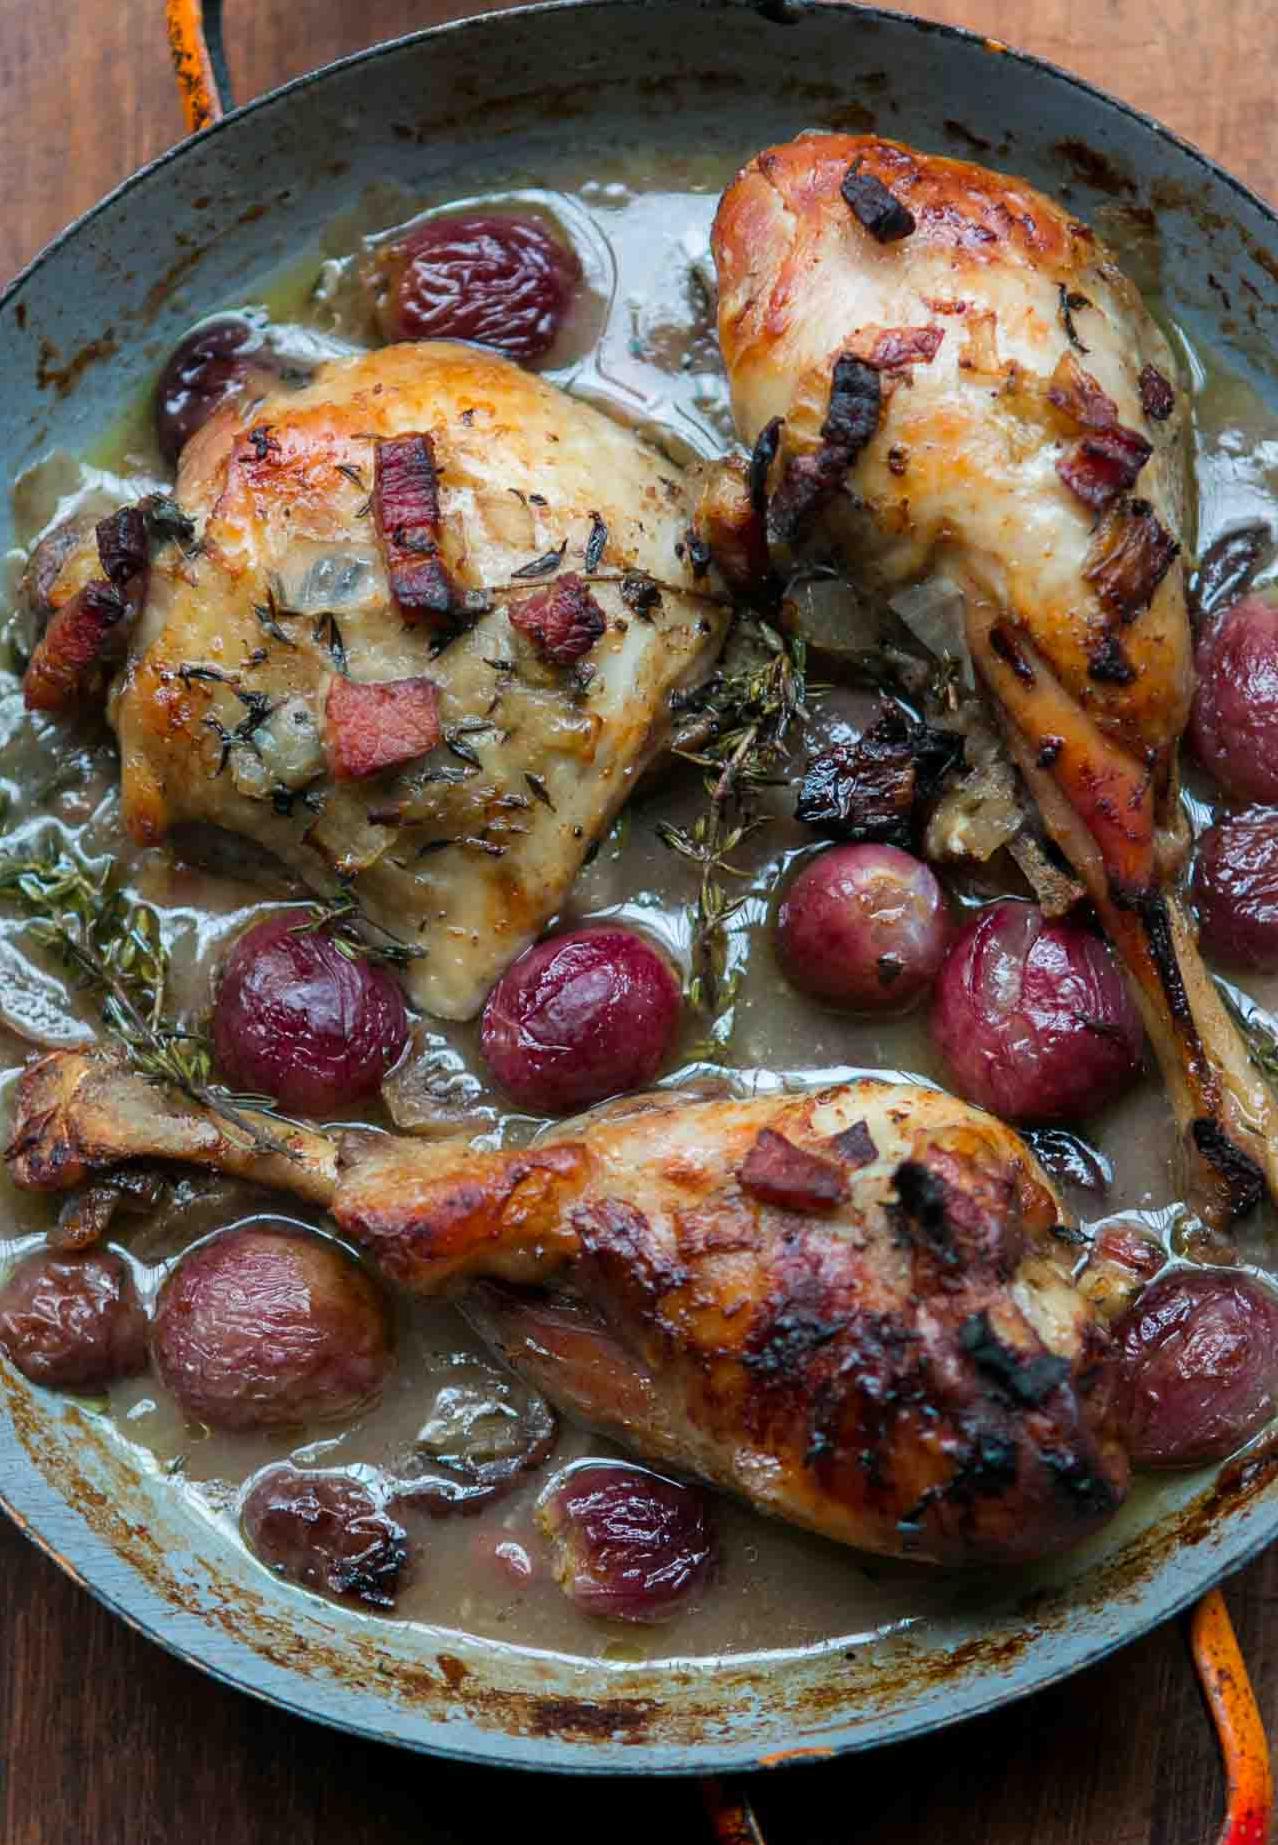  This chicken in red wine sauce will make you lick your plate clean.